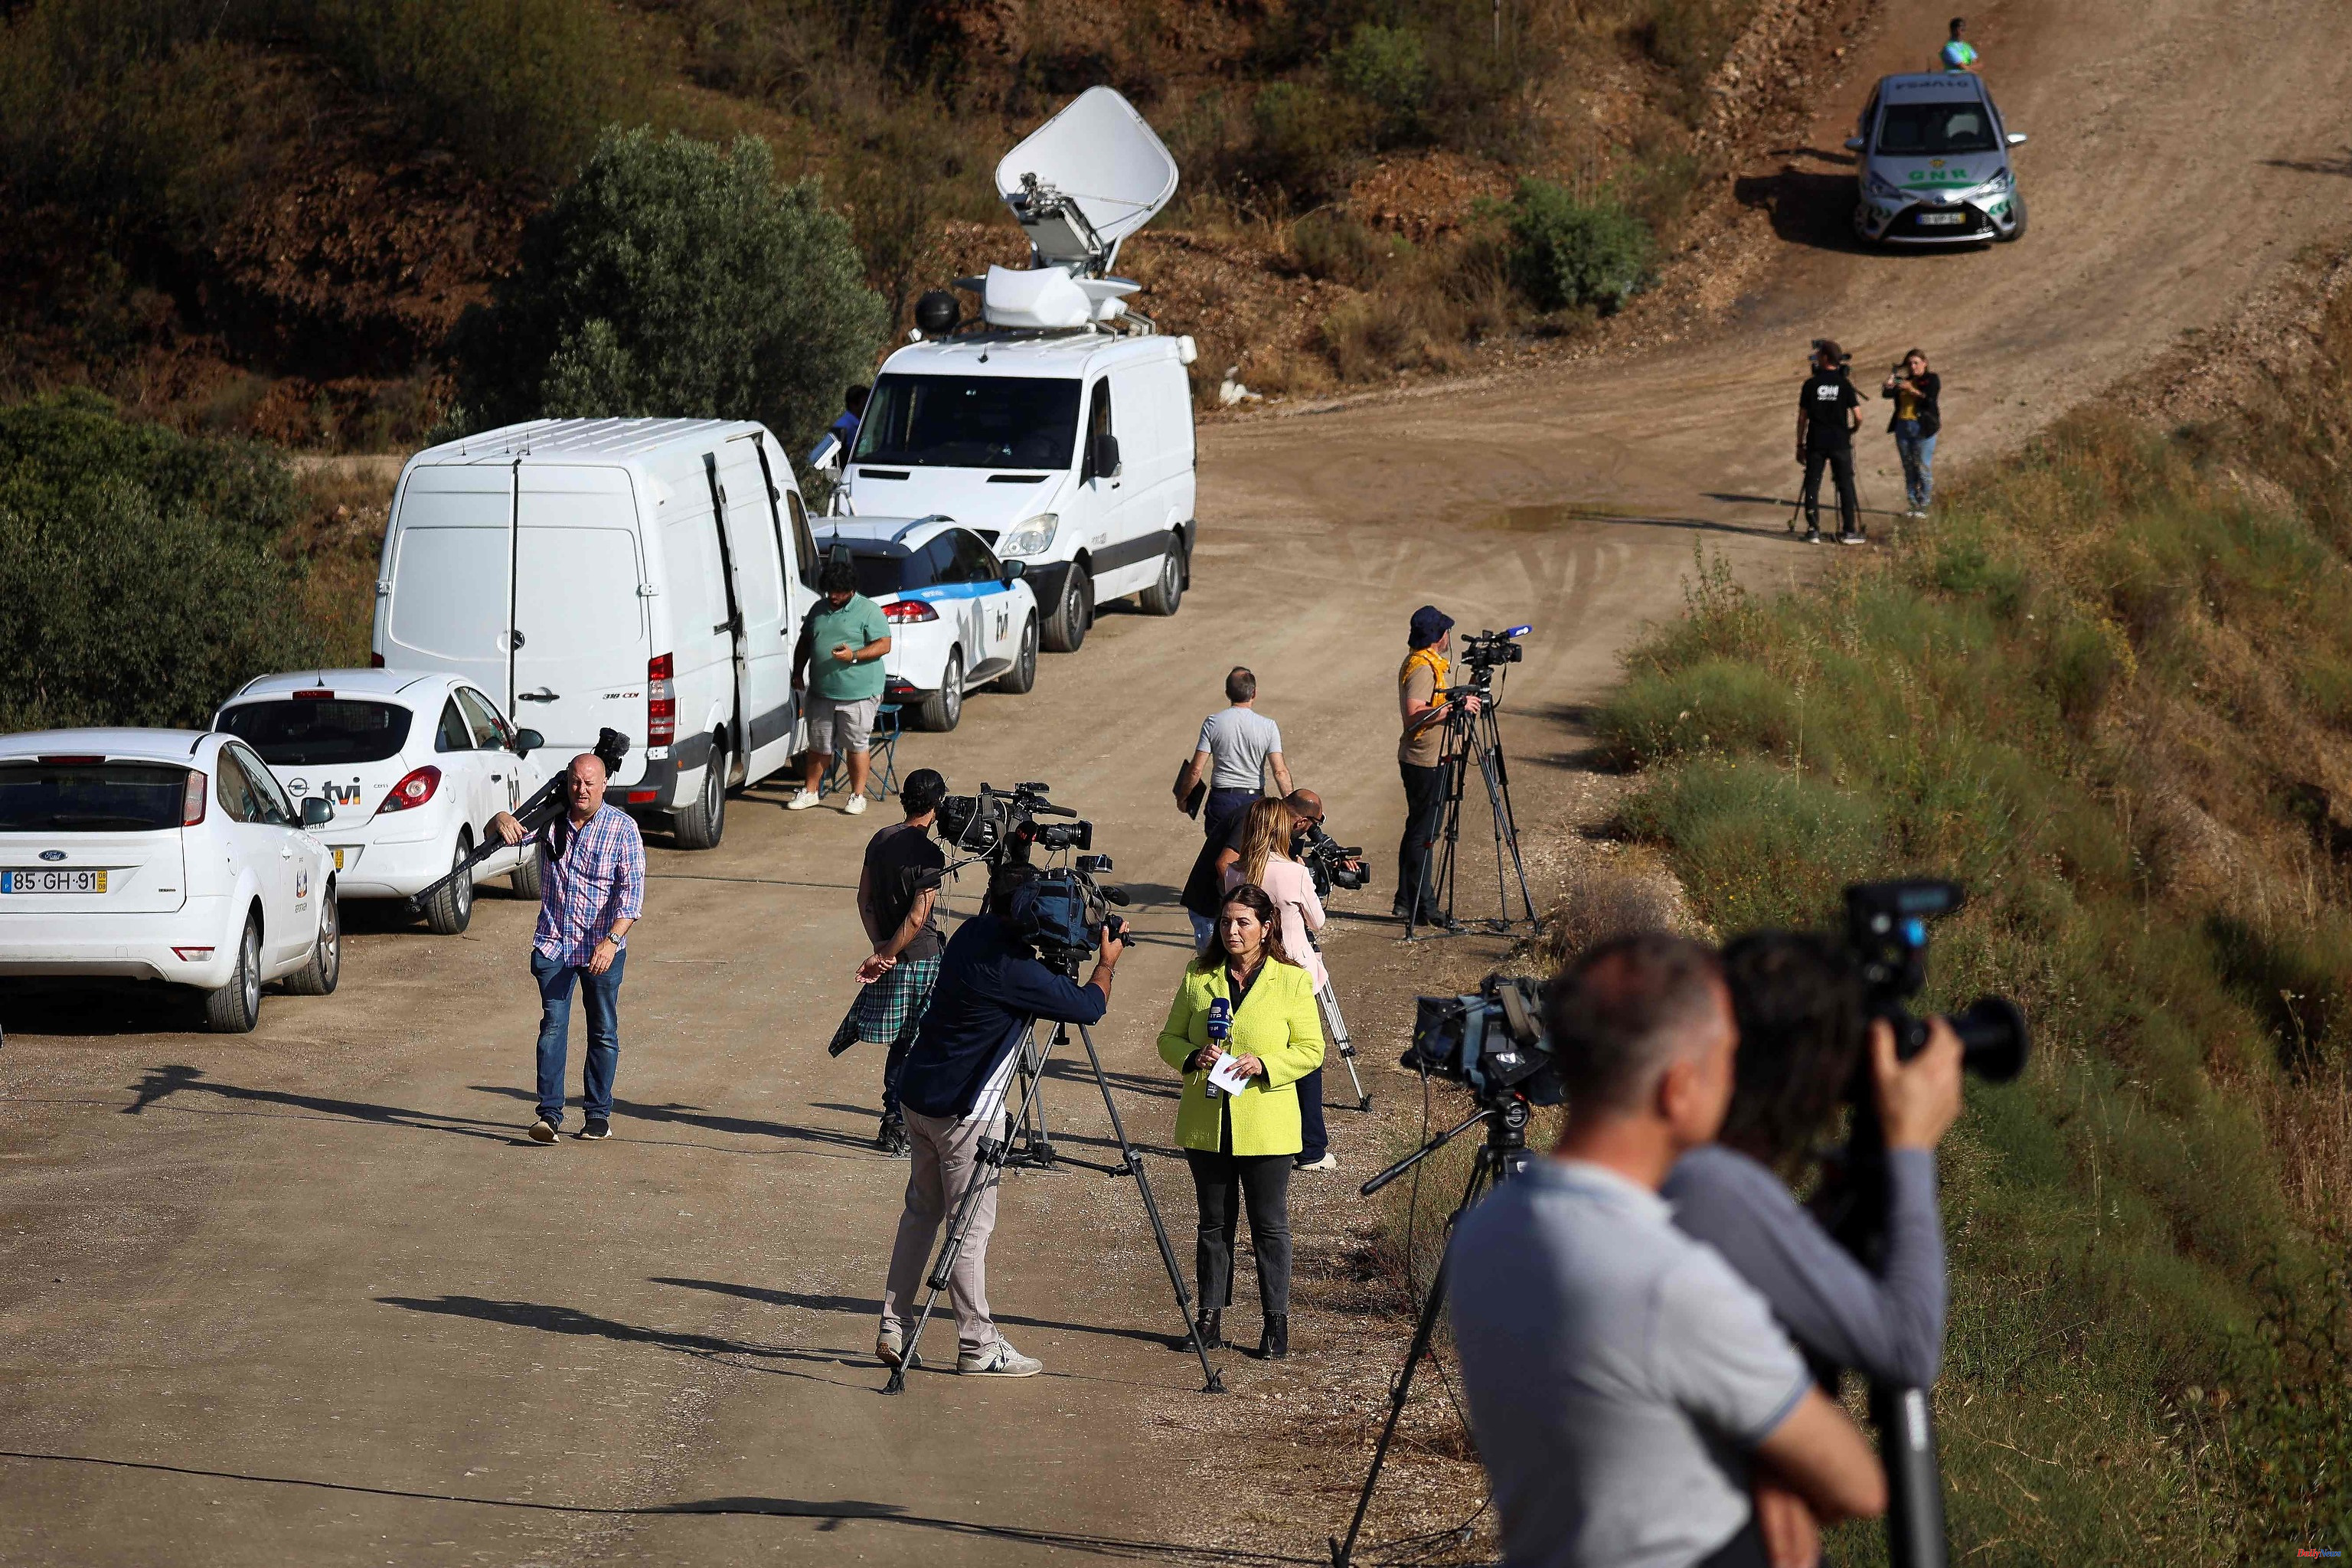 Europe Police extend search for clues about Madeleine McCann in the Portuguese swamp